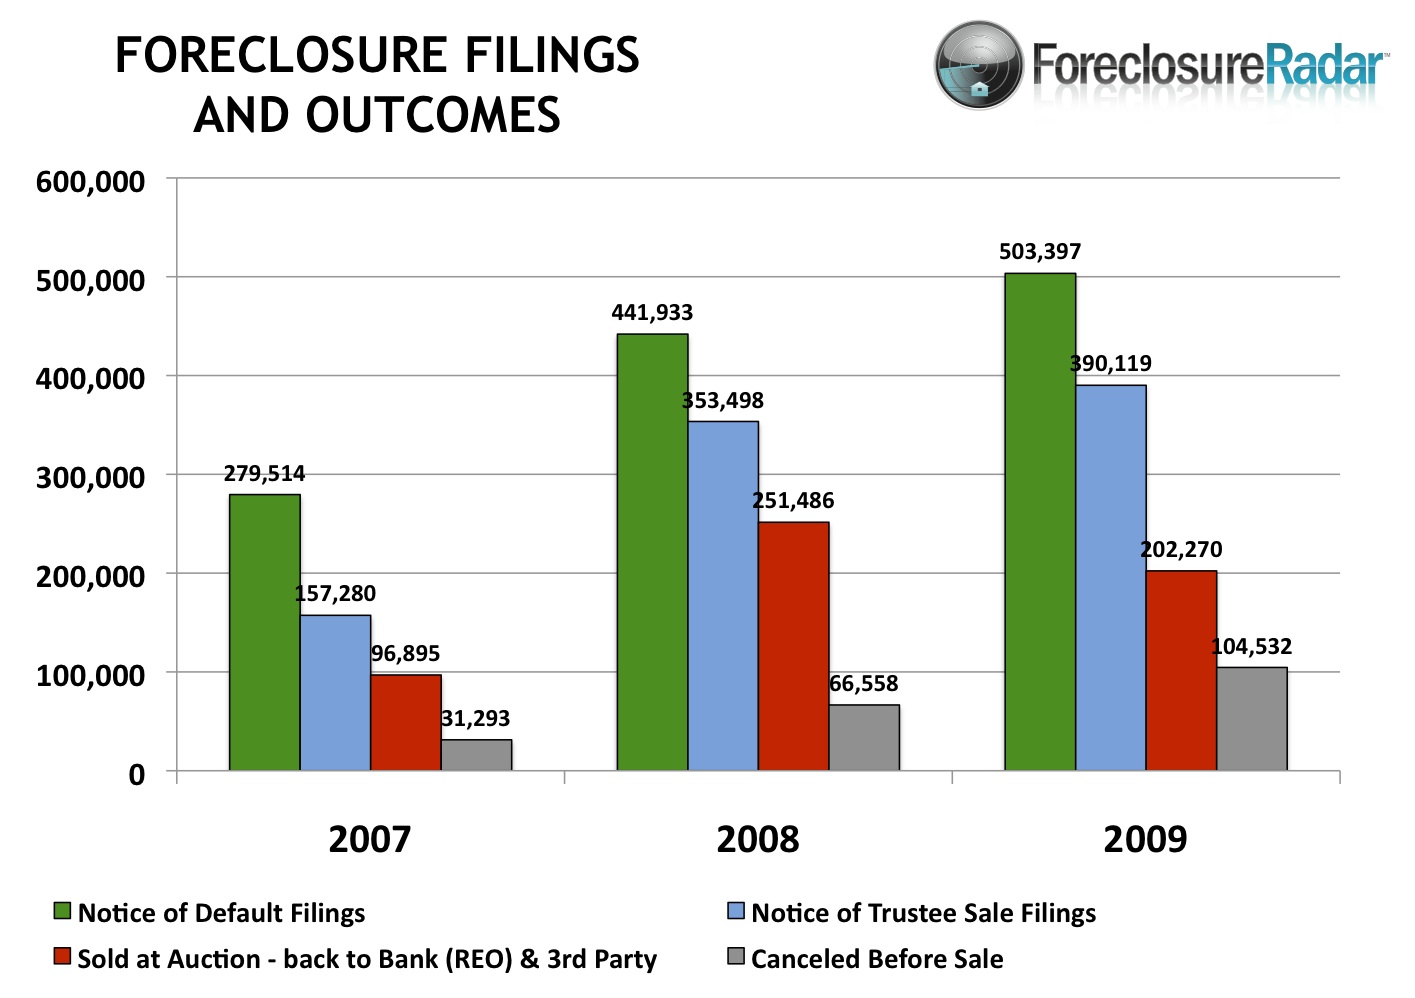 Foreclosure Filings and Outcomes